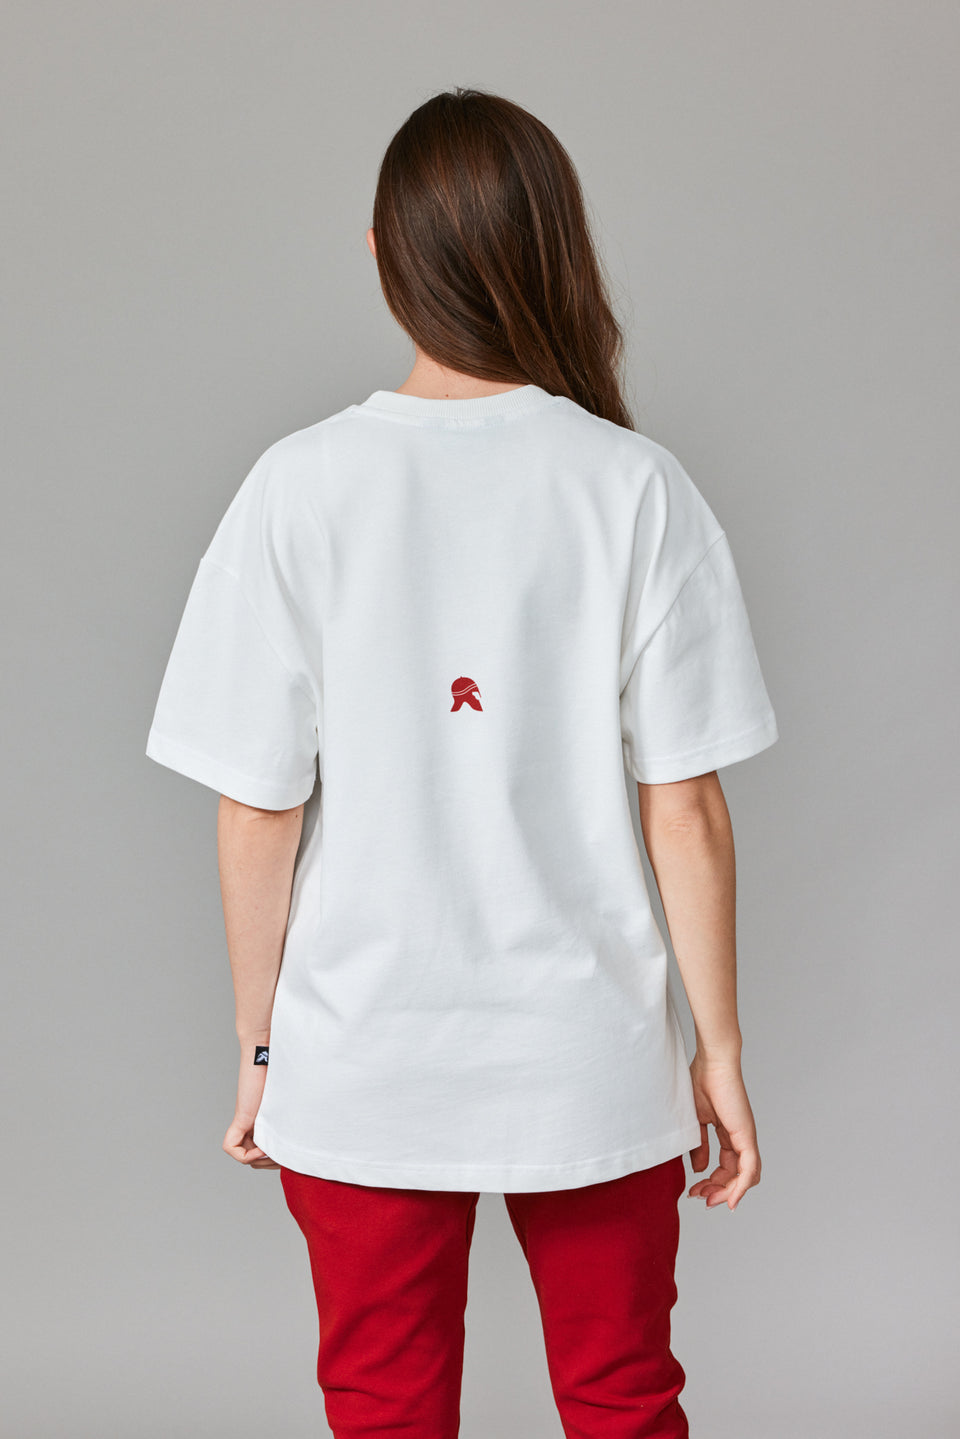 Illyrian Oval T-shirt - White